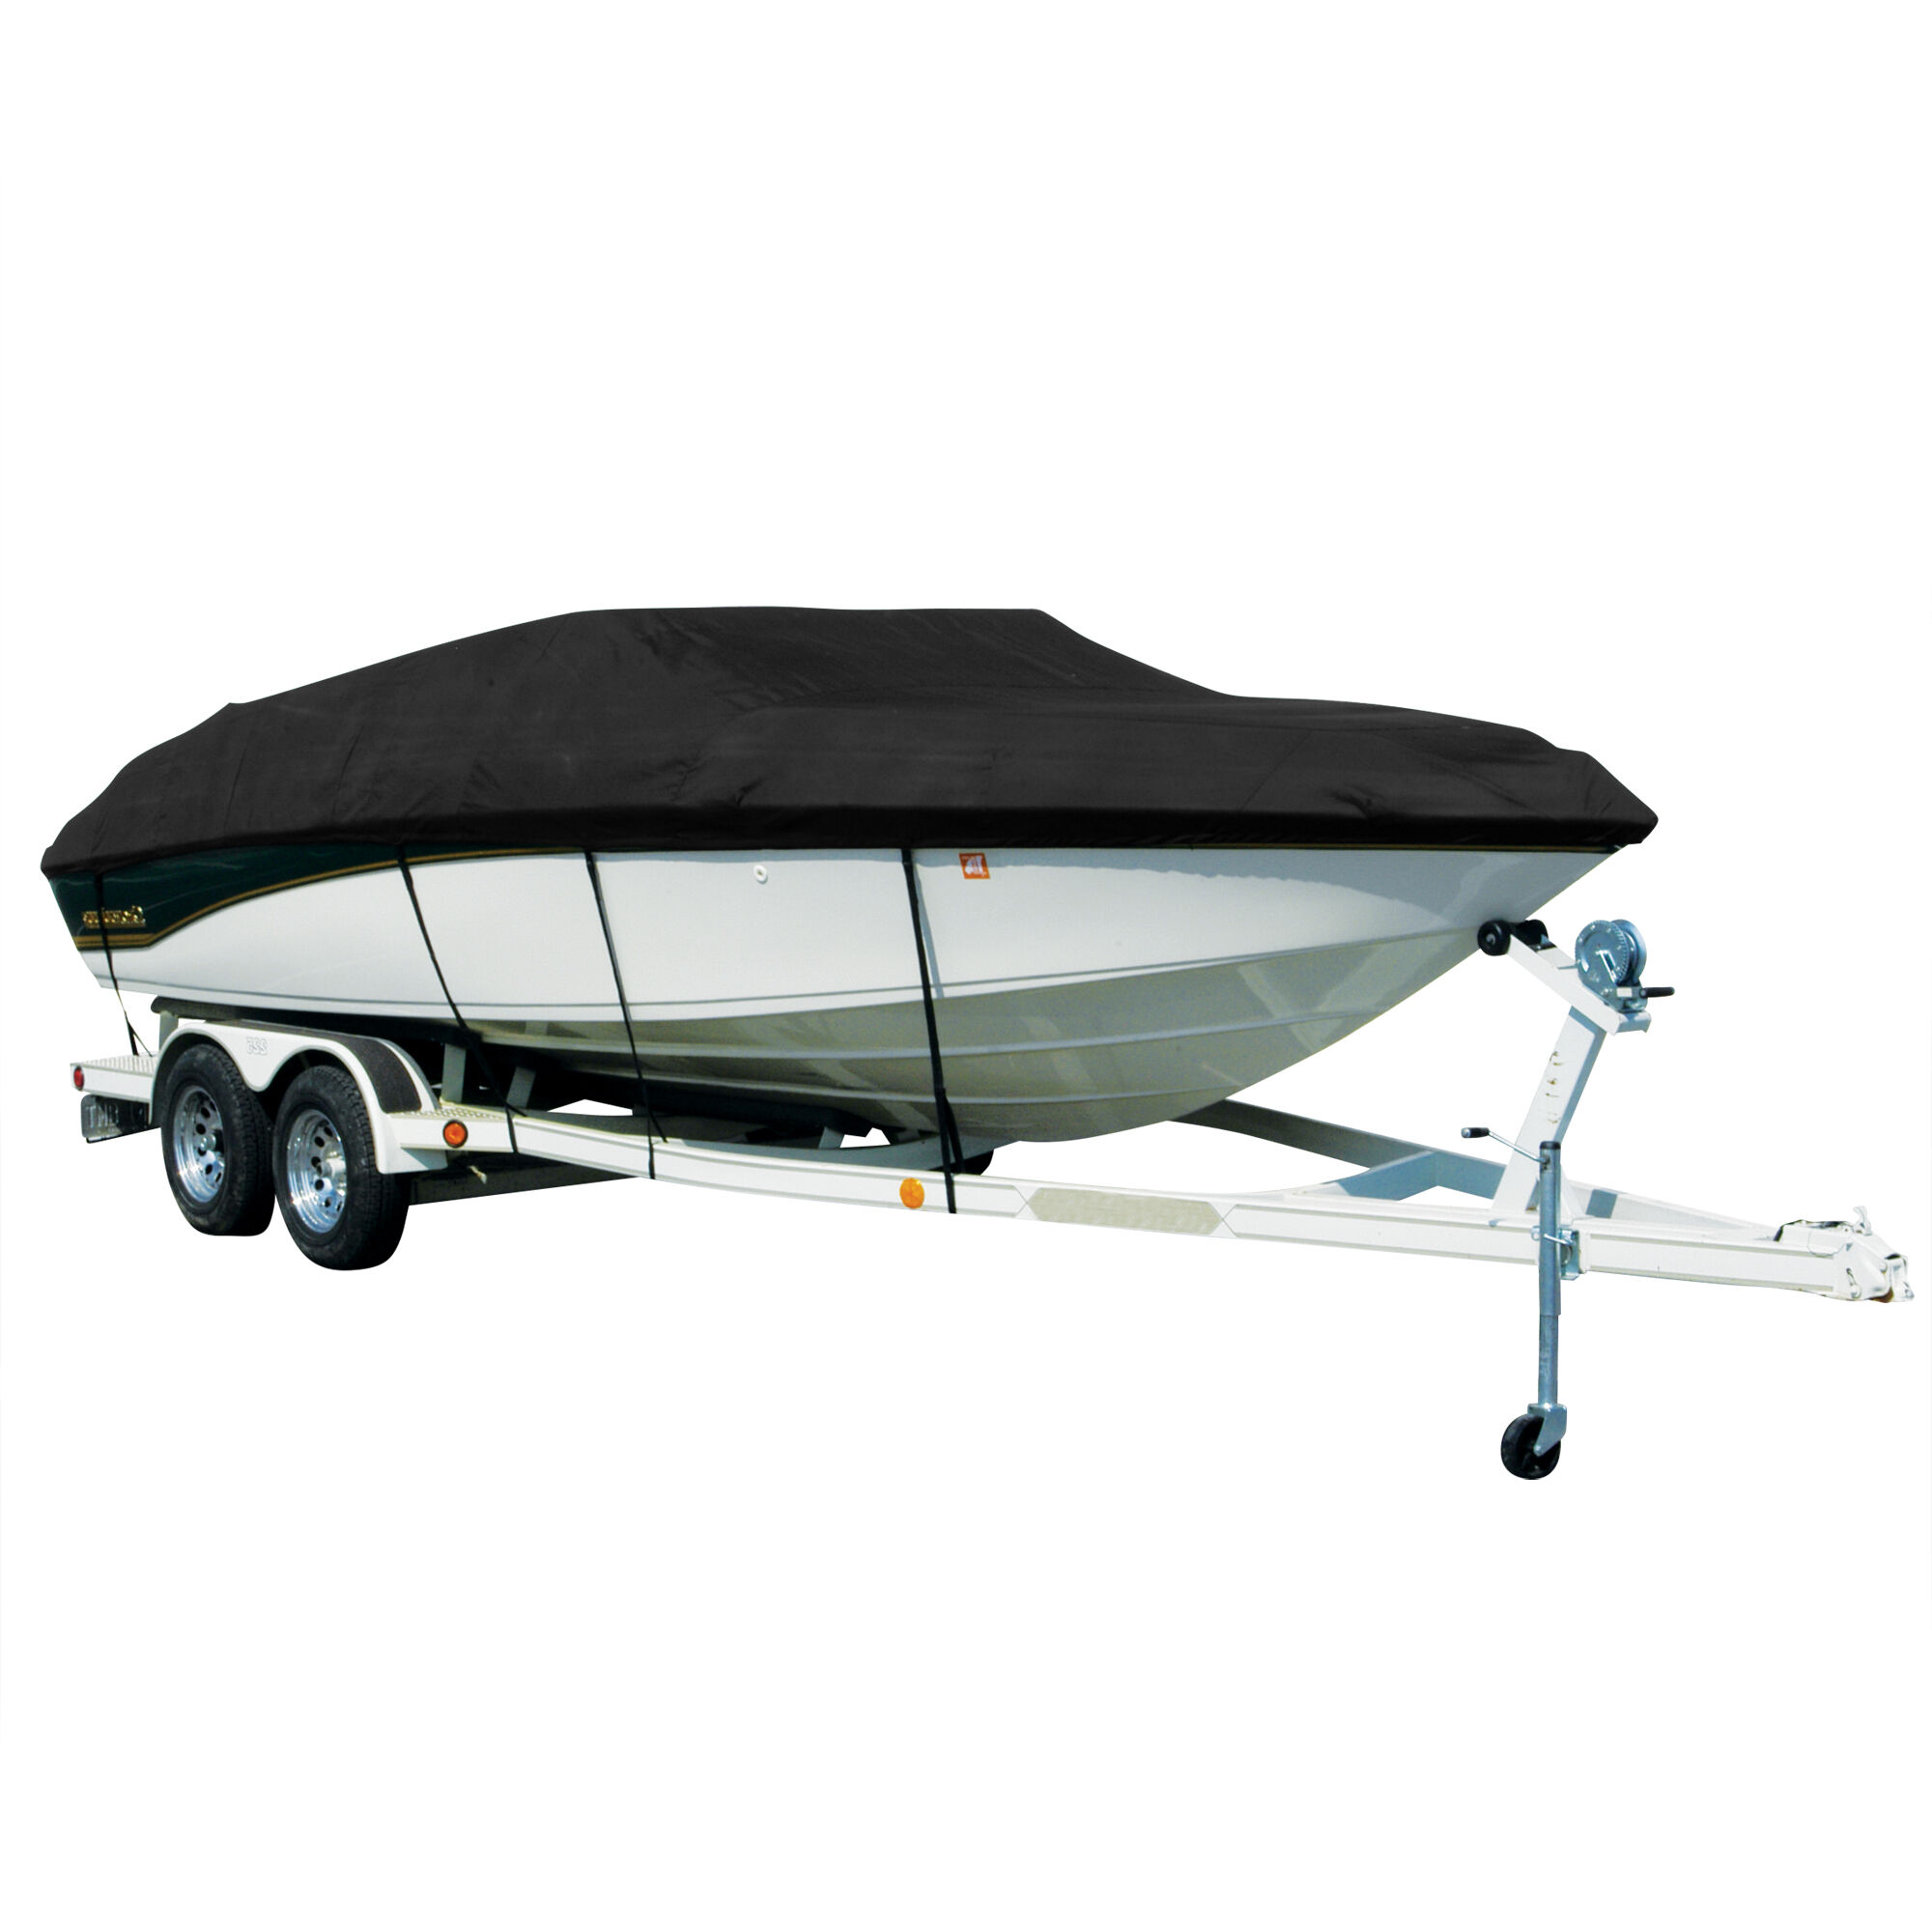 Covermate Exact Fit Sharkskin Boat Cover For Tahoe 550 Ts w/ Bimin Laid Aft On Storage Strut Over Motor in Black